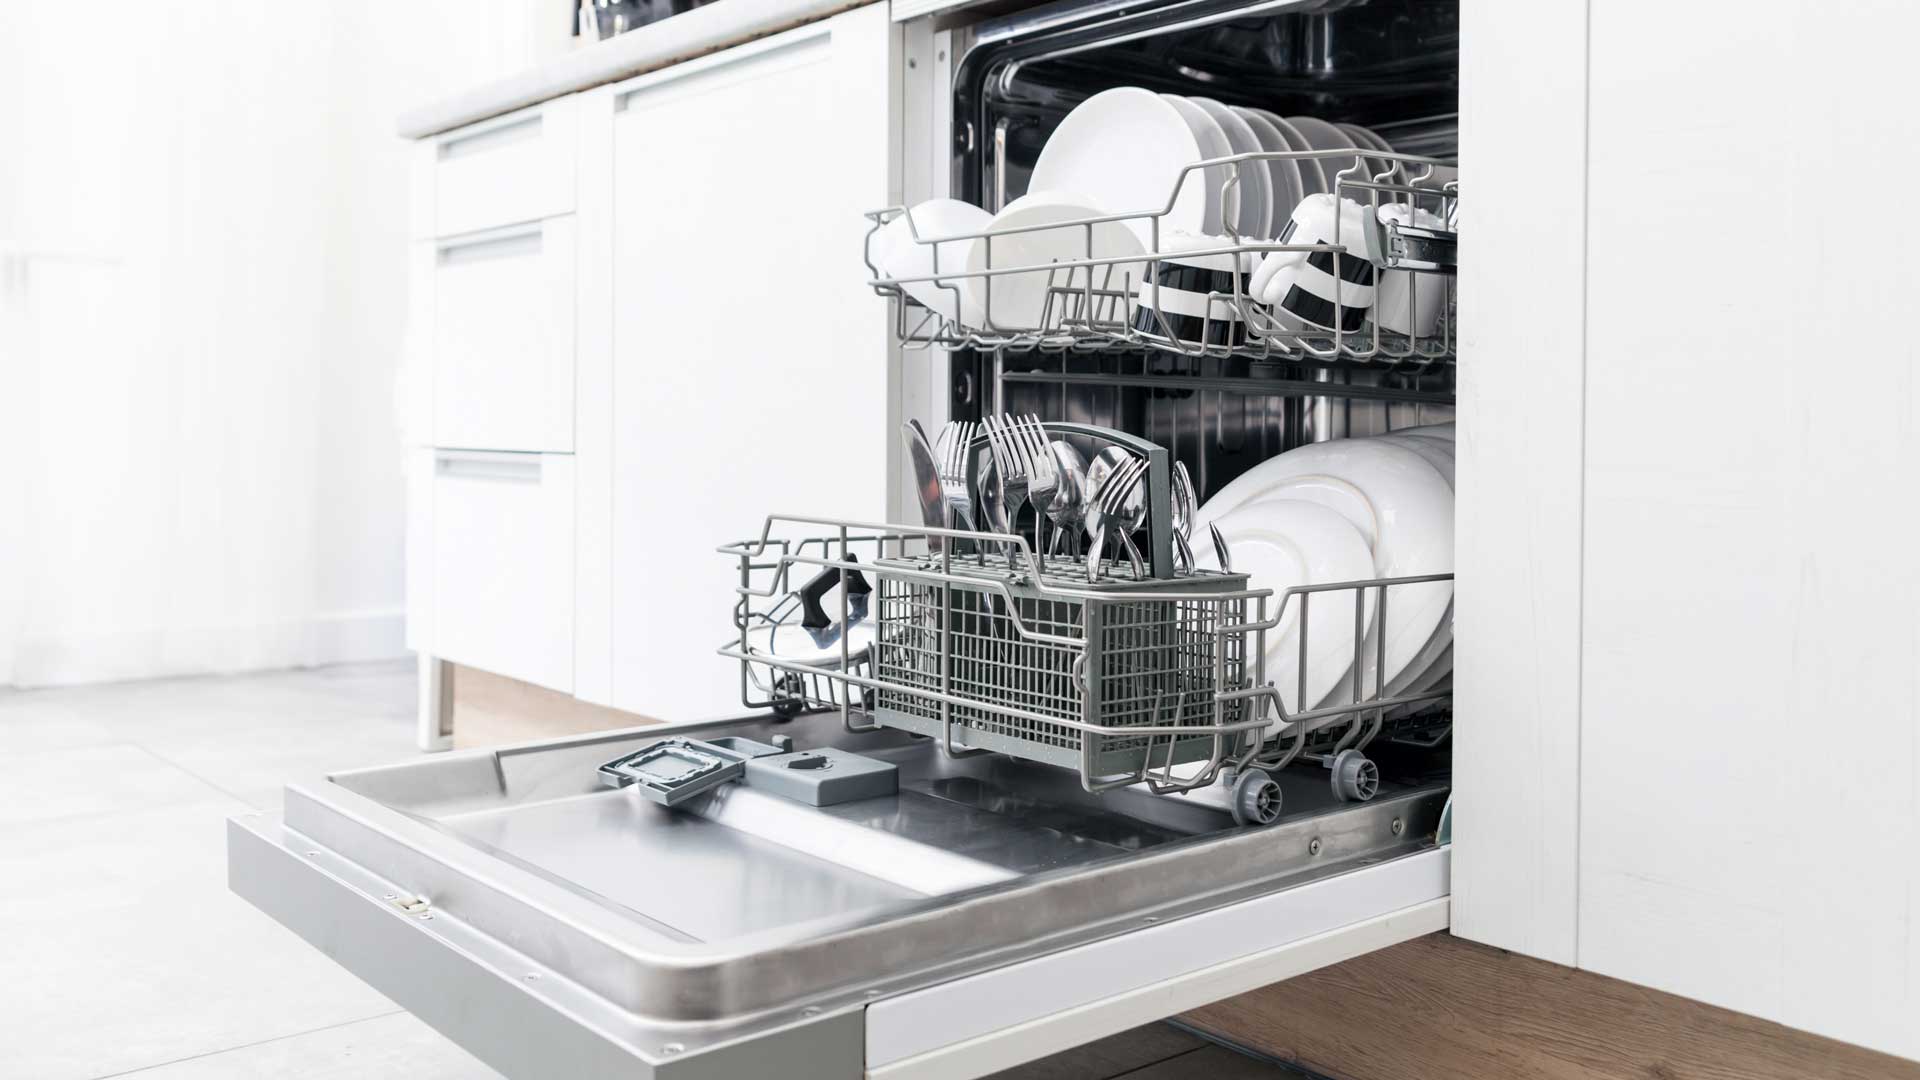 Dishwasher full of clean dishes